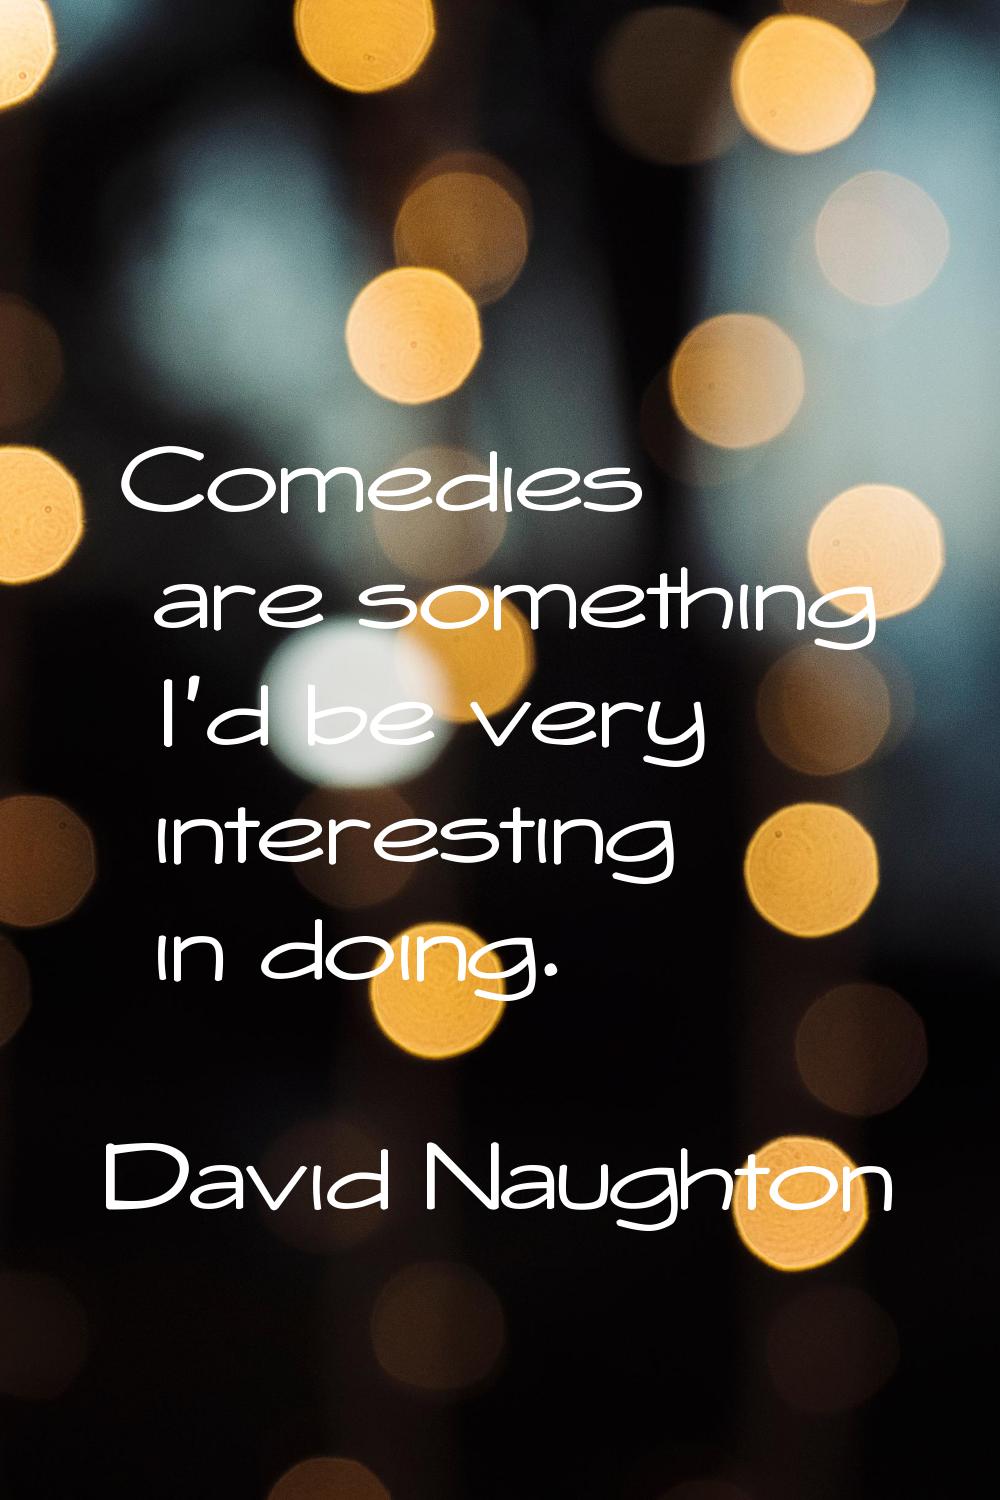 Comedies are something I'd be very interesting in doing.